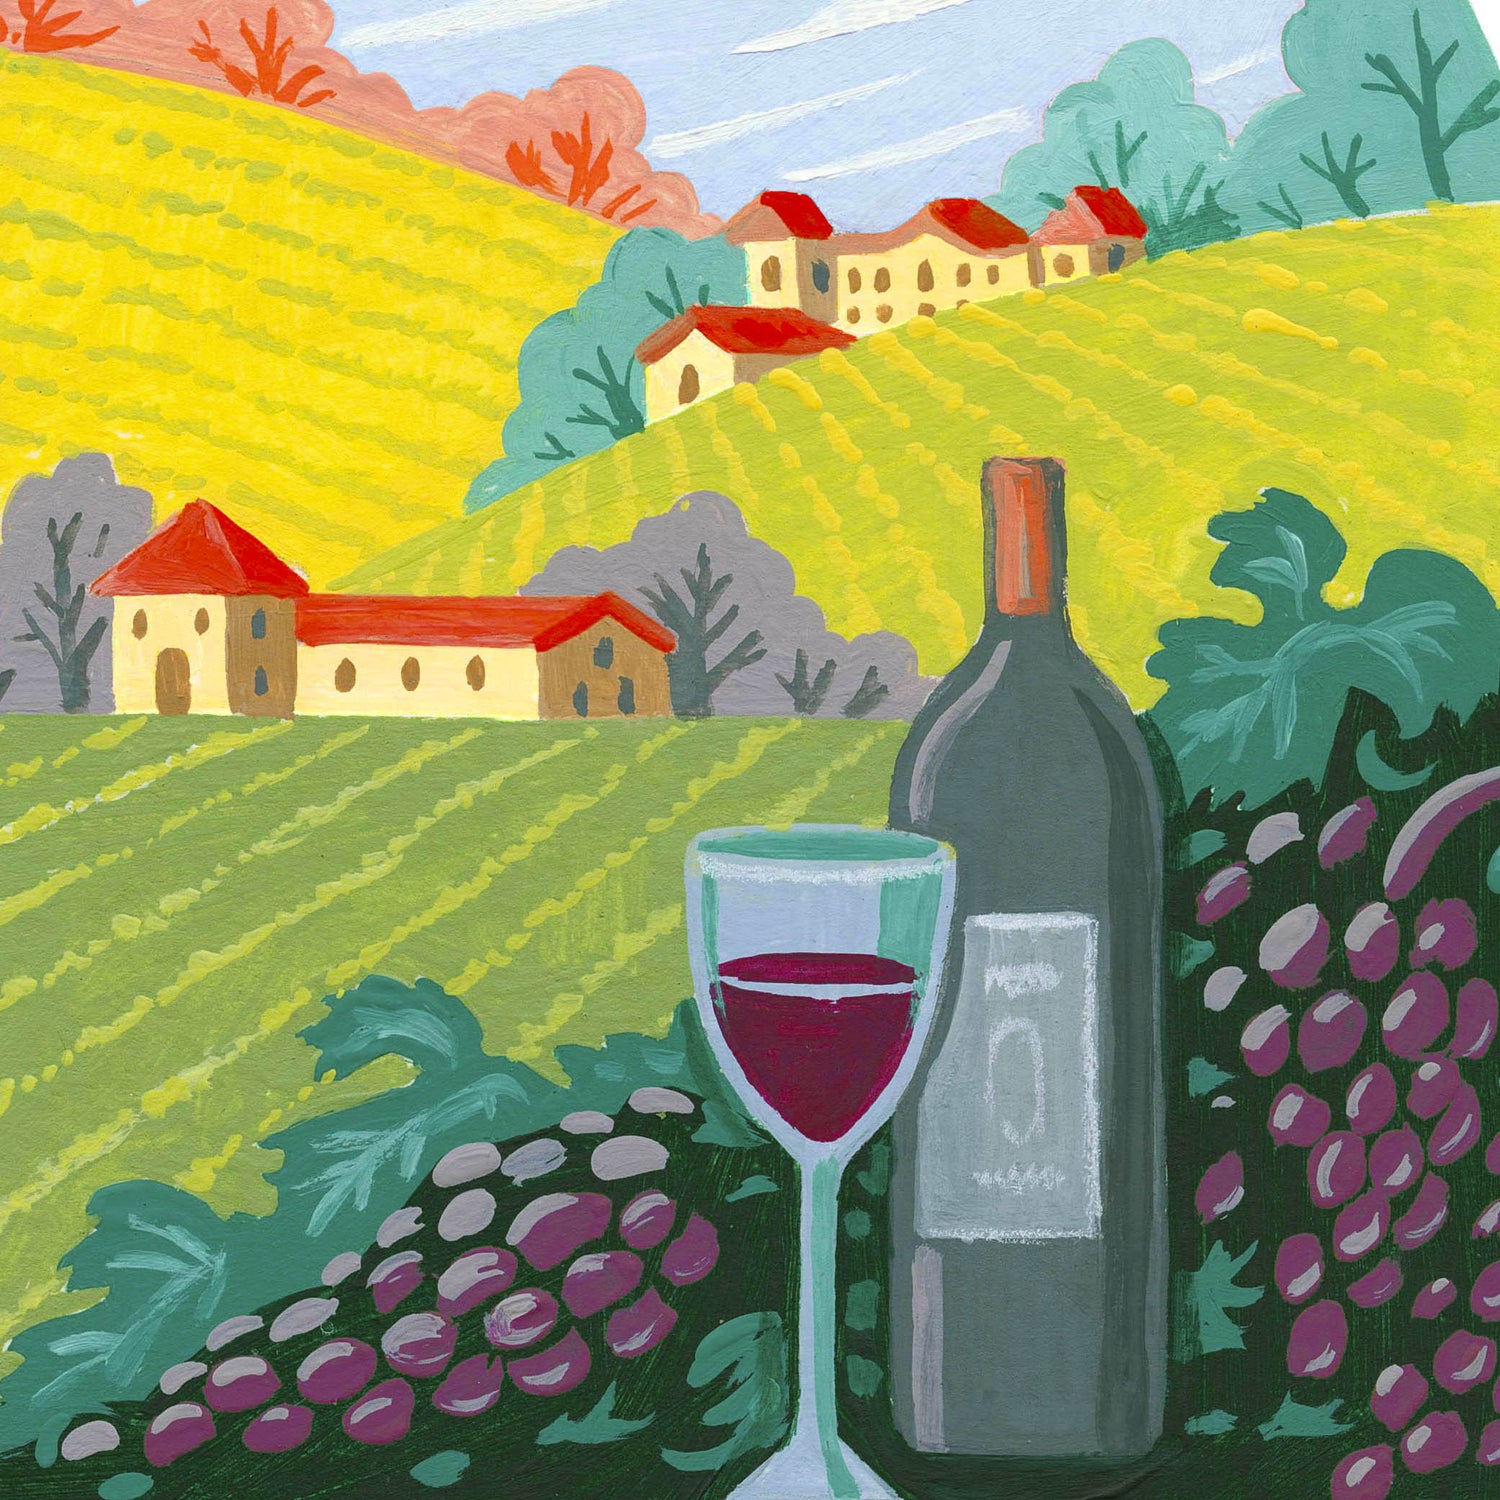 Napa Valley art detail with wine, wineries, and vineyards in modern colors; illustration by Angela Staehling